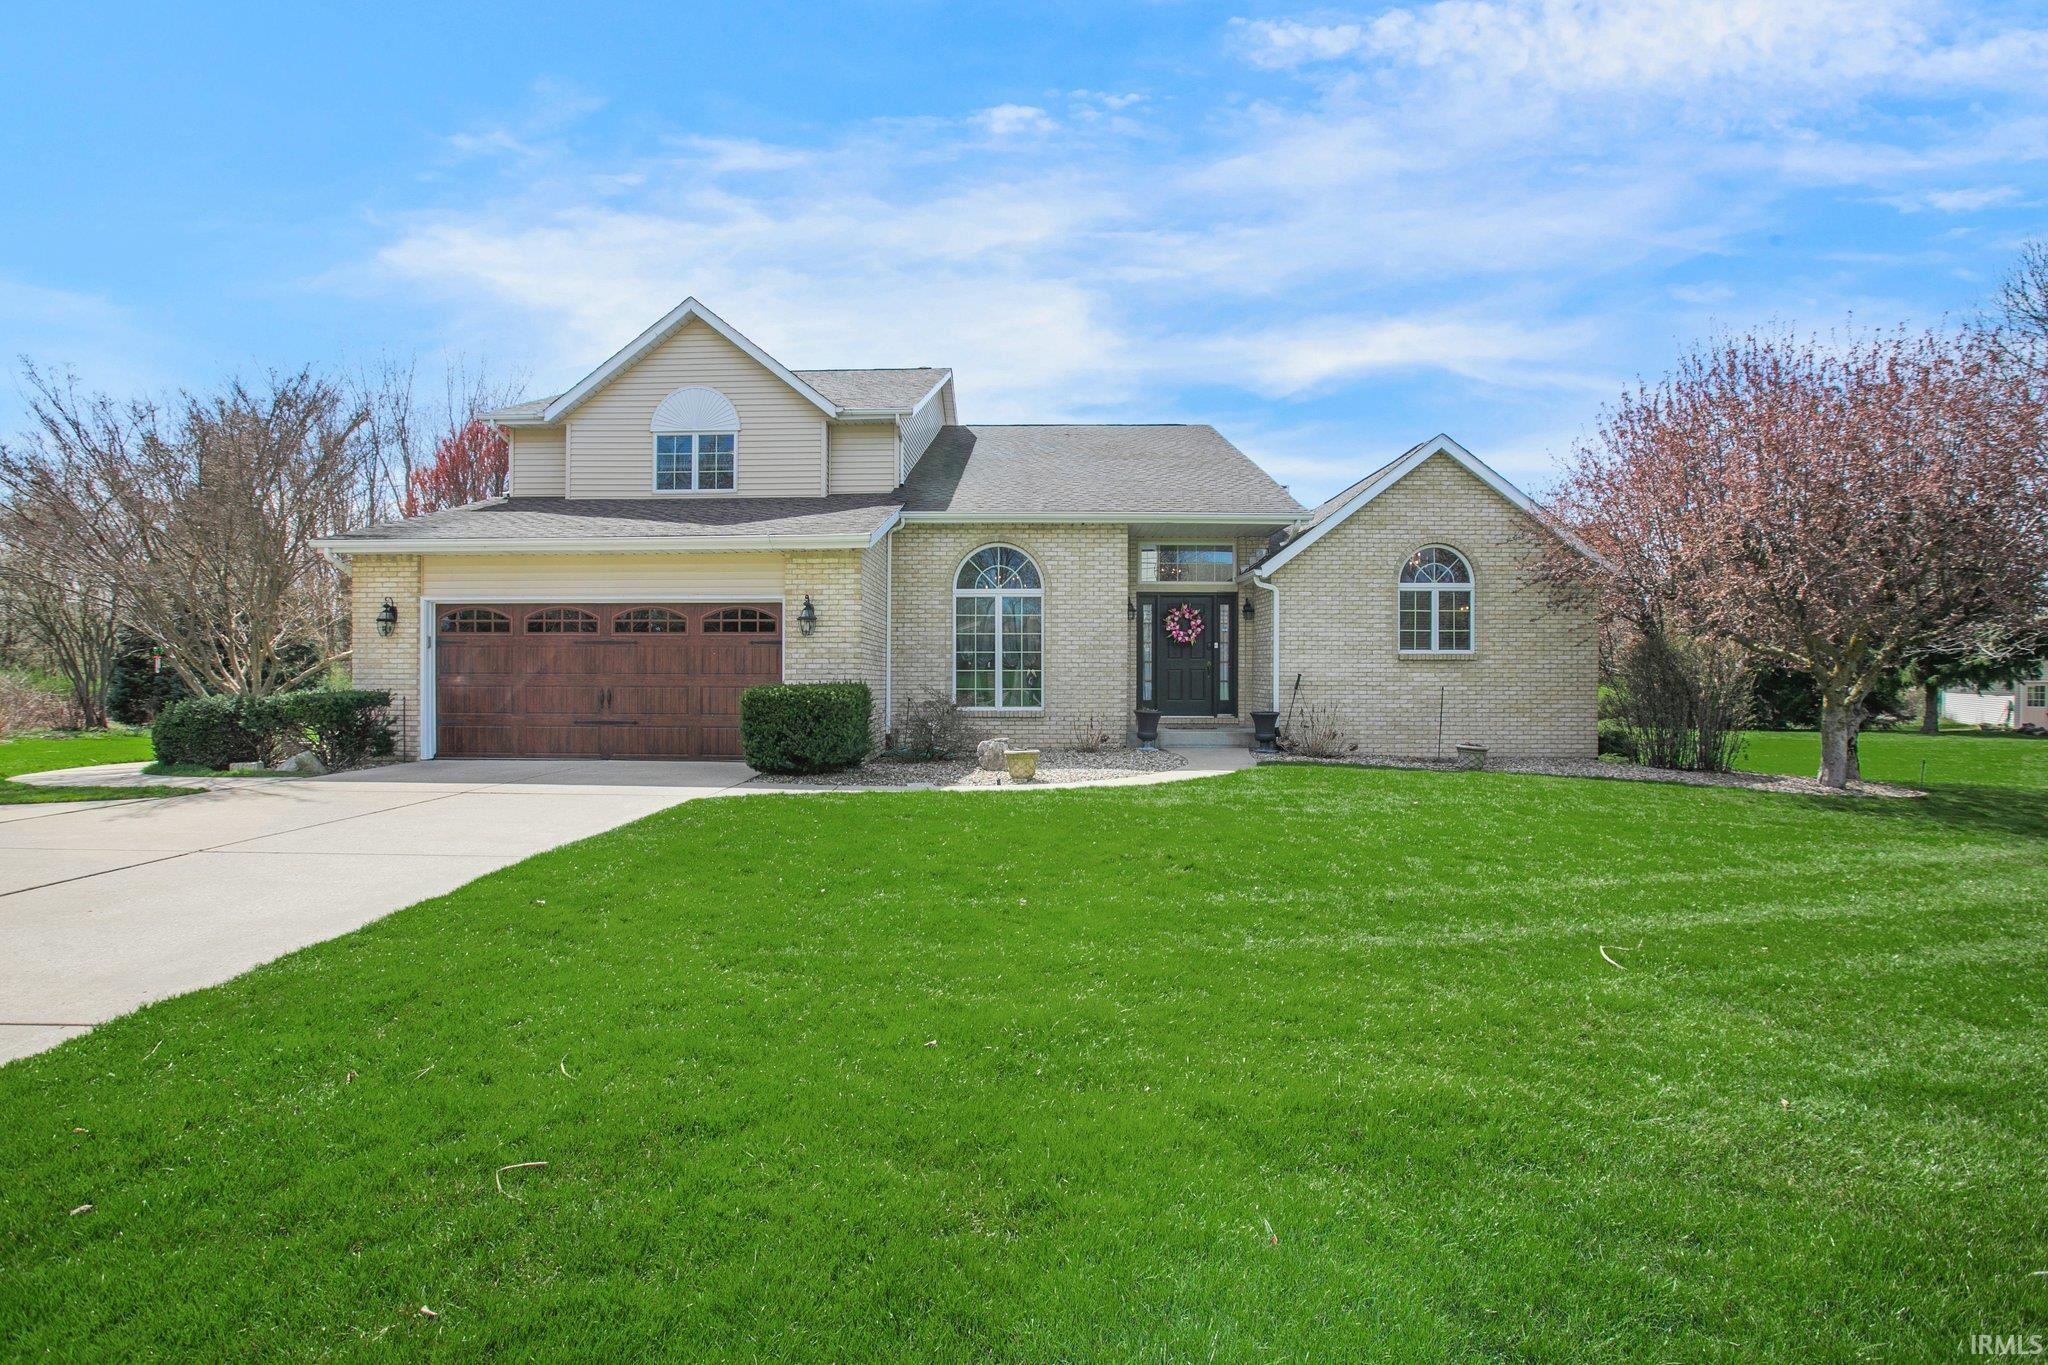 61637 Miami Meadows Court, South Bend, IN 